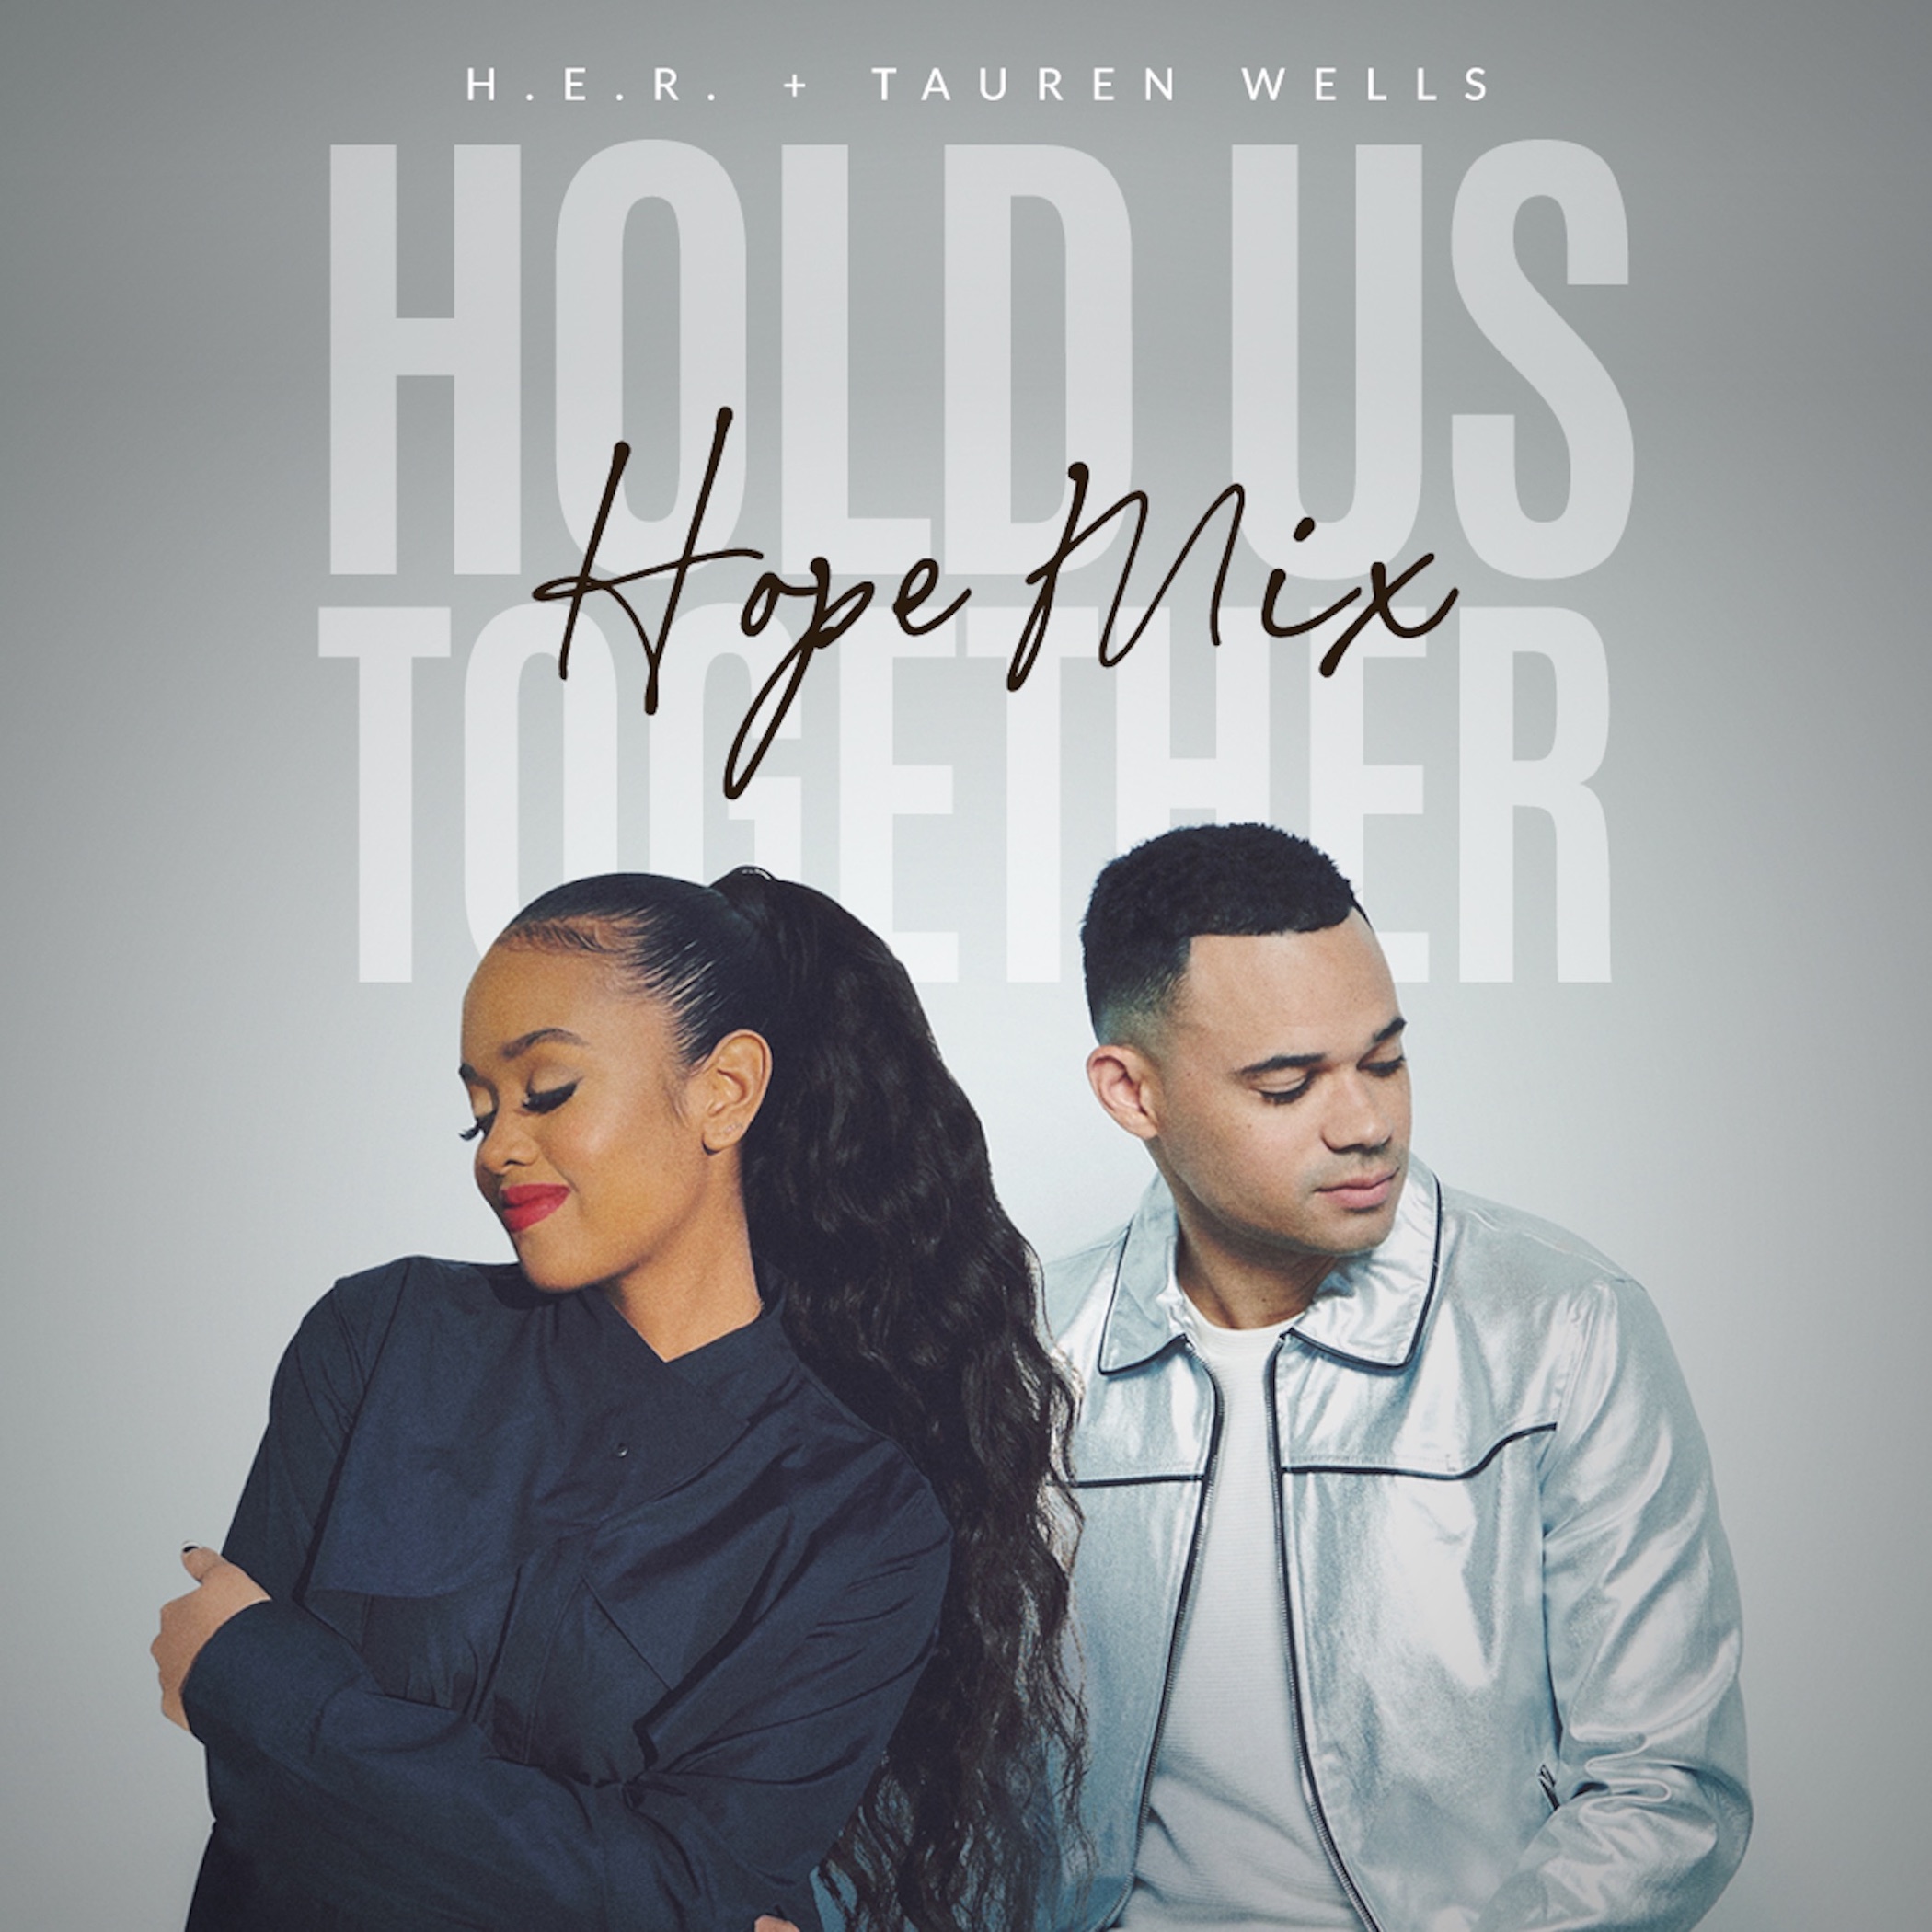 H.E.R. and Tauren Wells Release Stirring New Visual ‘Hold Us Together’ -VIDEO